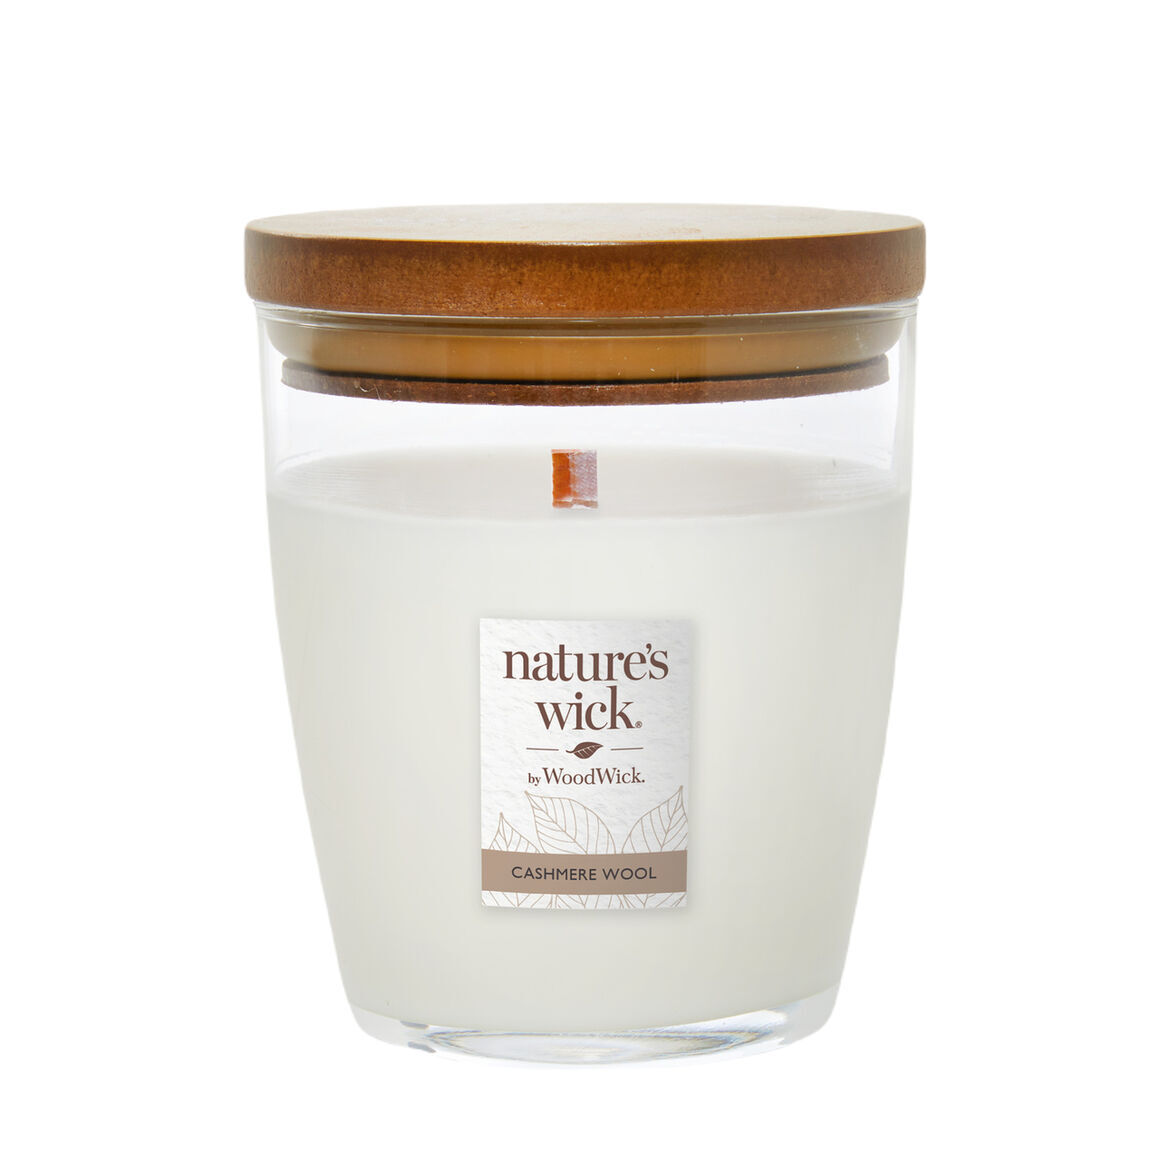 Nature's Wick By WoodWick Cashmere Wool ароматическая свеча Cashmere Wool, 284 г